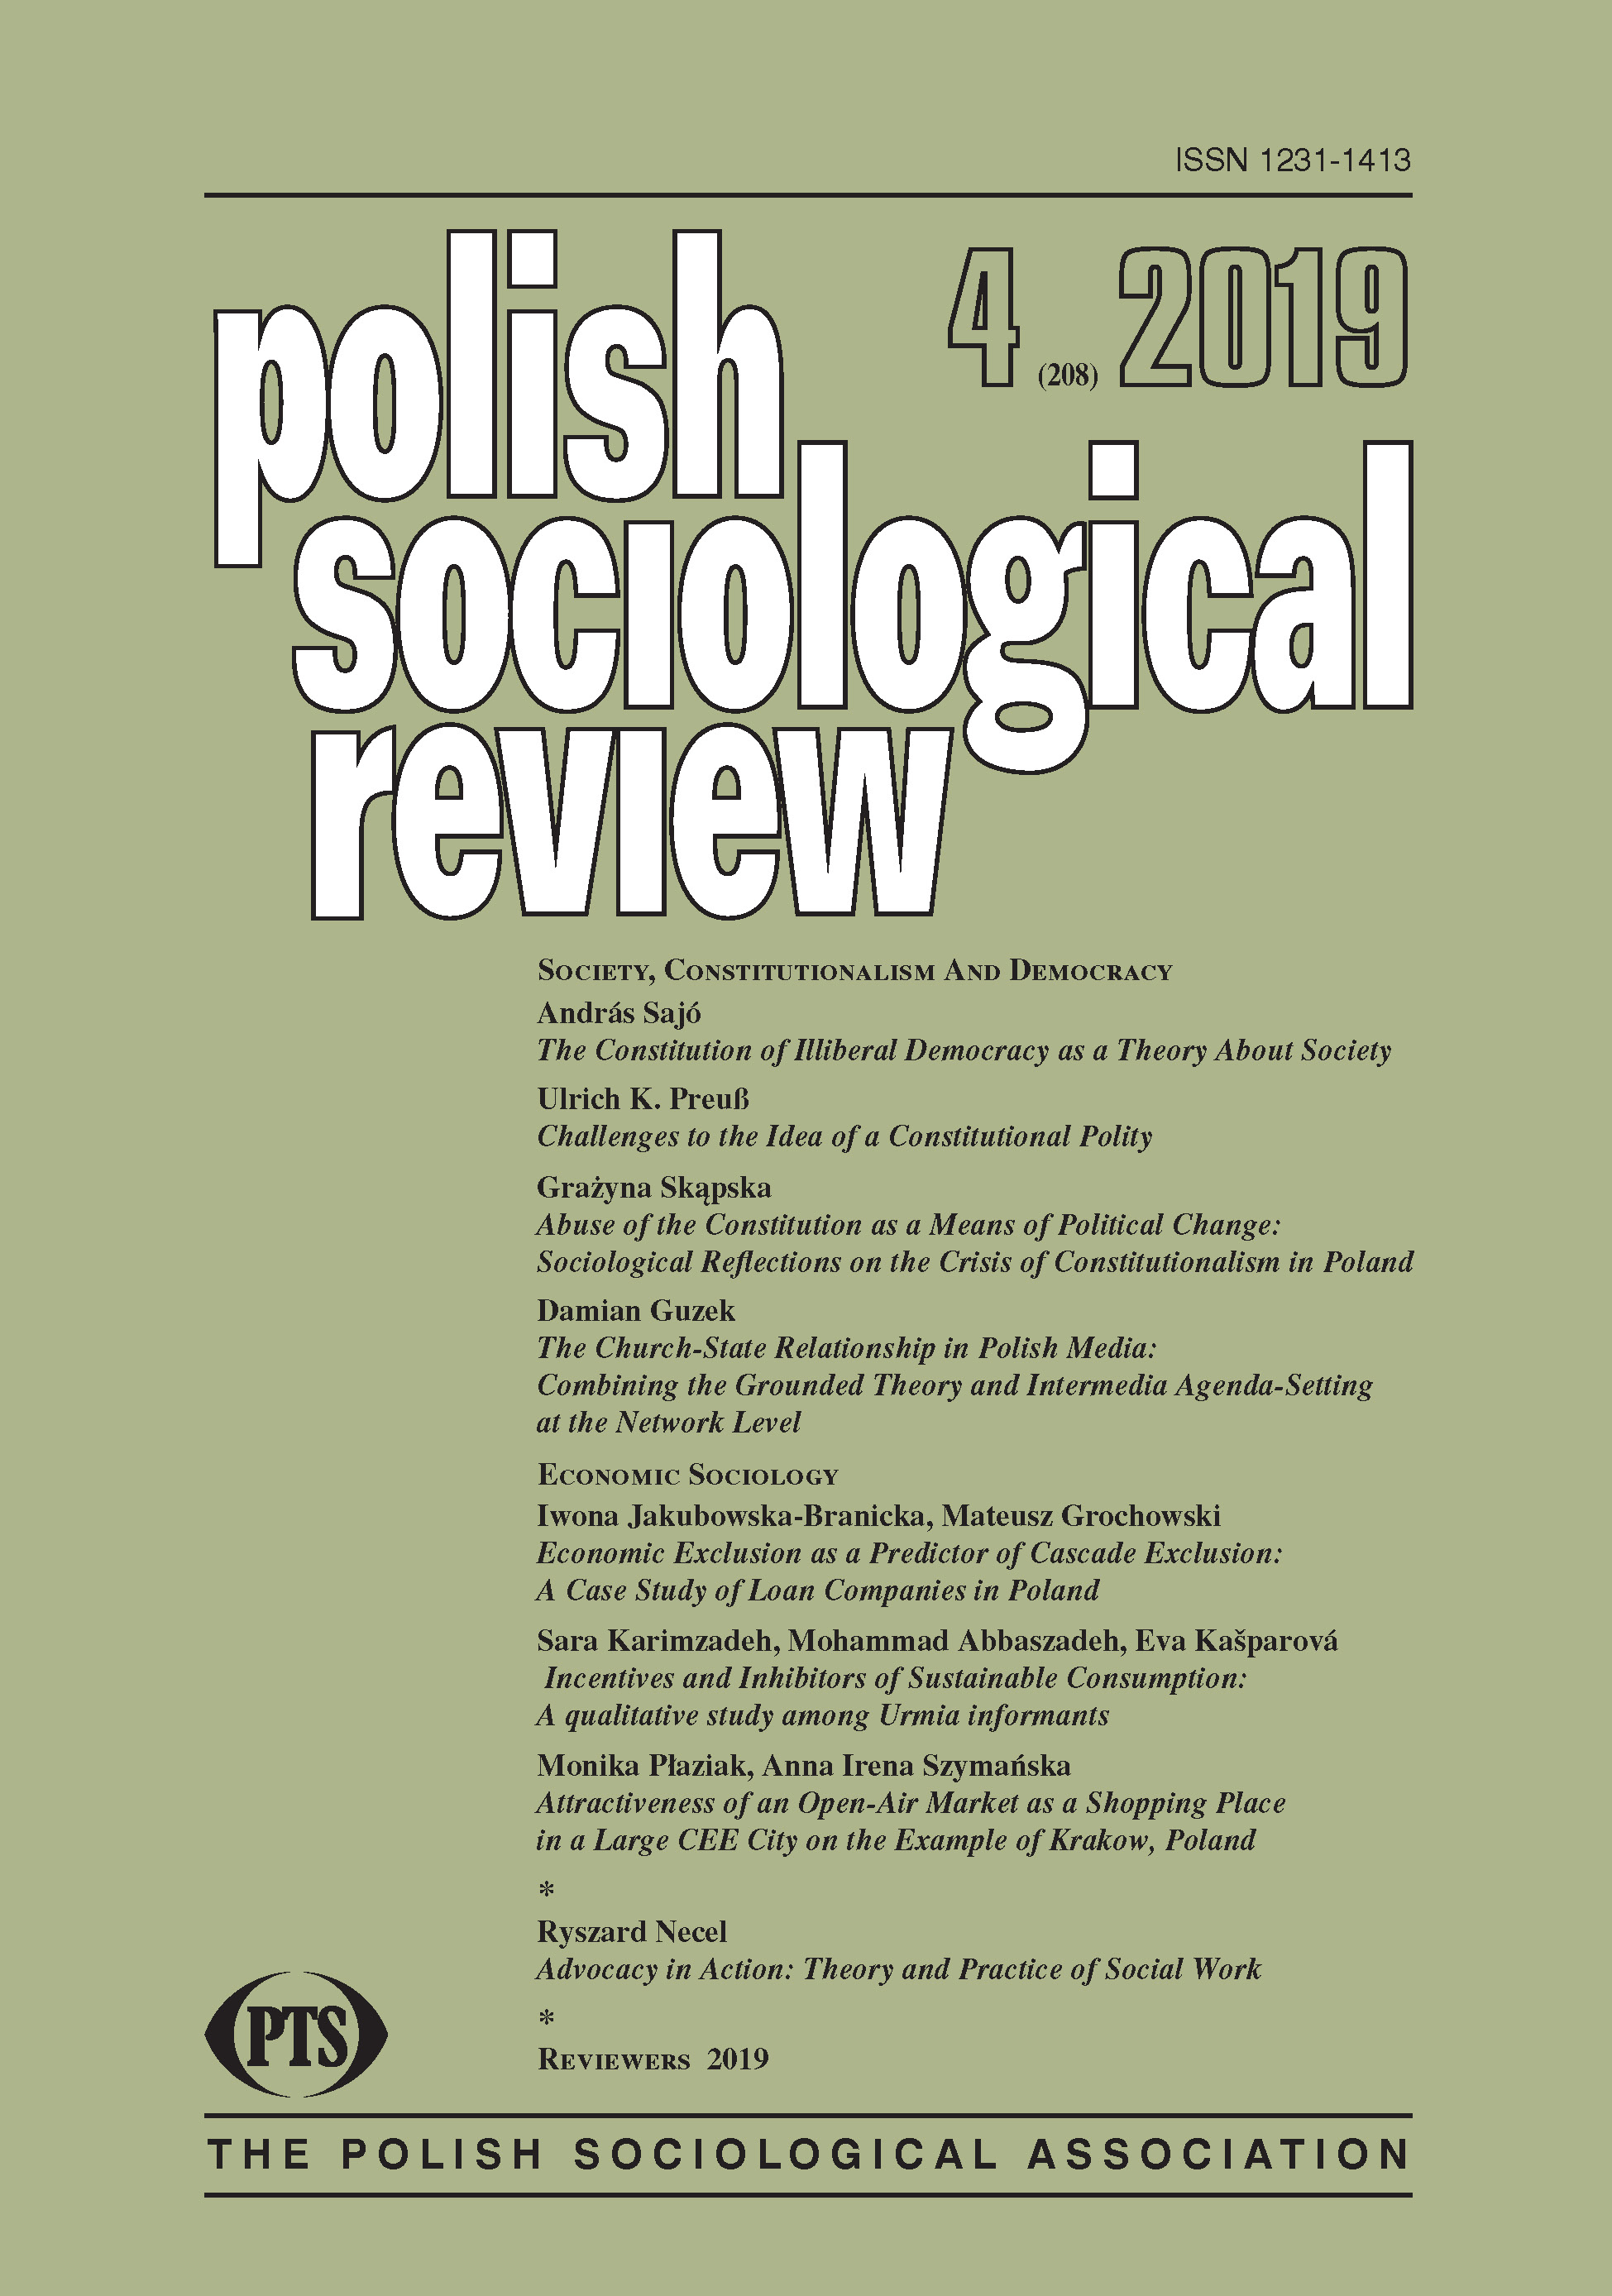 The Church–State Relationship in Polish Media:
Combining the Grounded Theory and Intermedia Agenda-Setting at the Network Level Cover Image